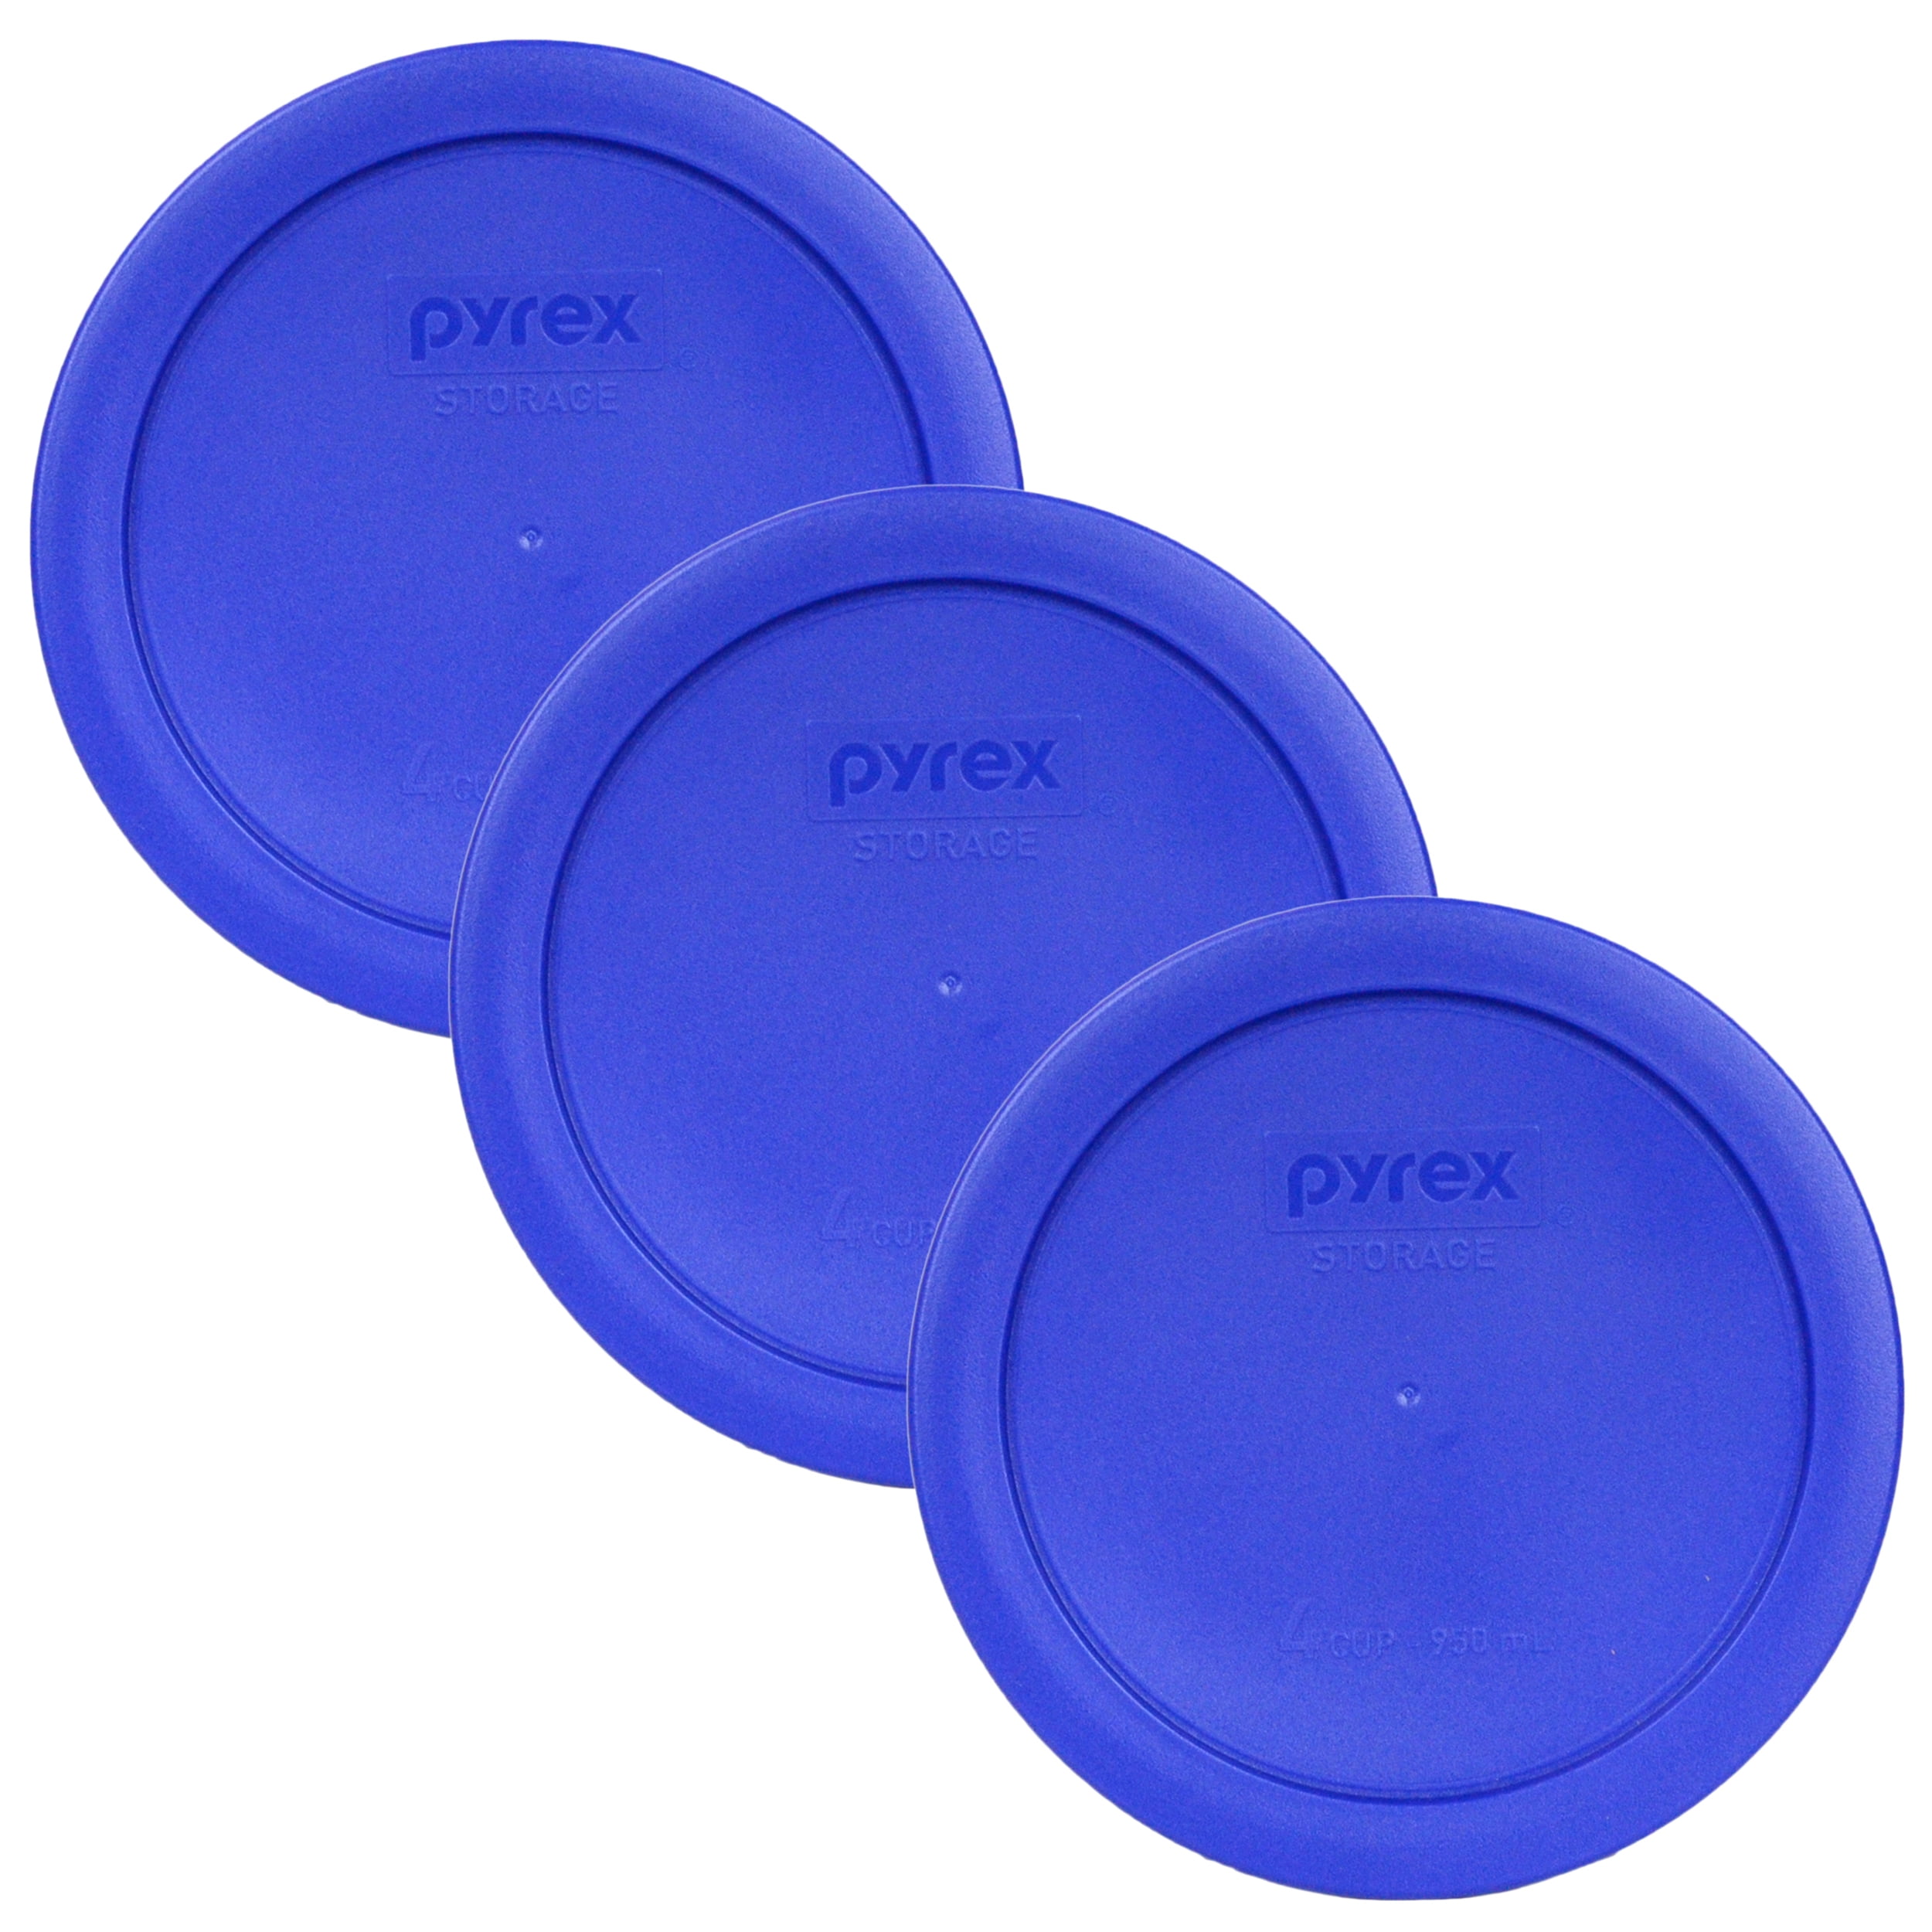 Pyrex 4 Cup Round Plastic Cover Navy Blue 